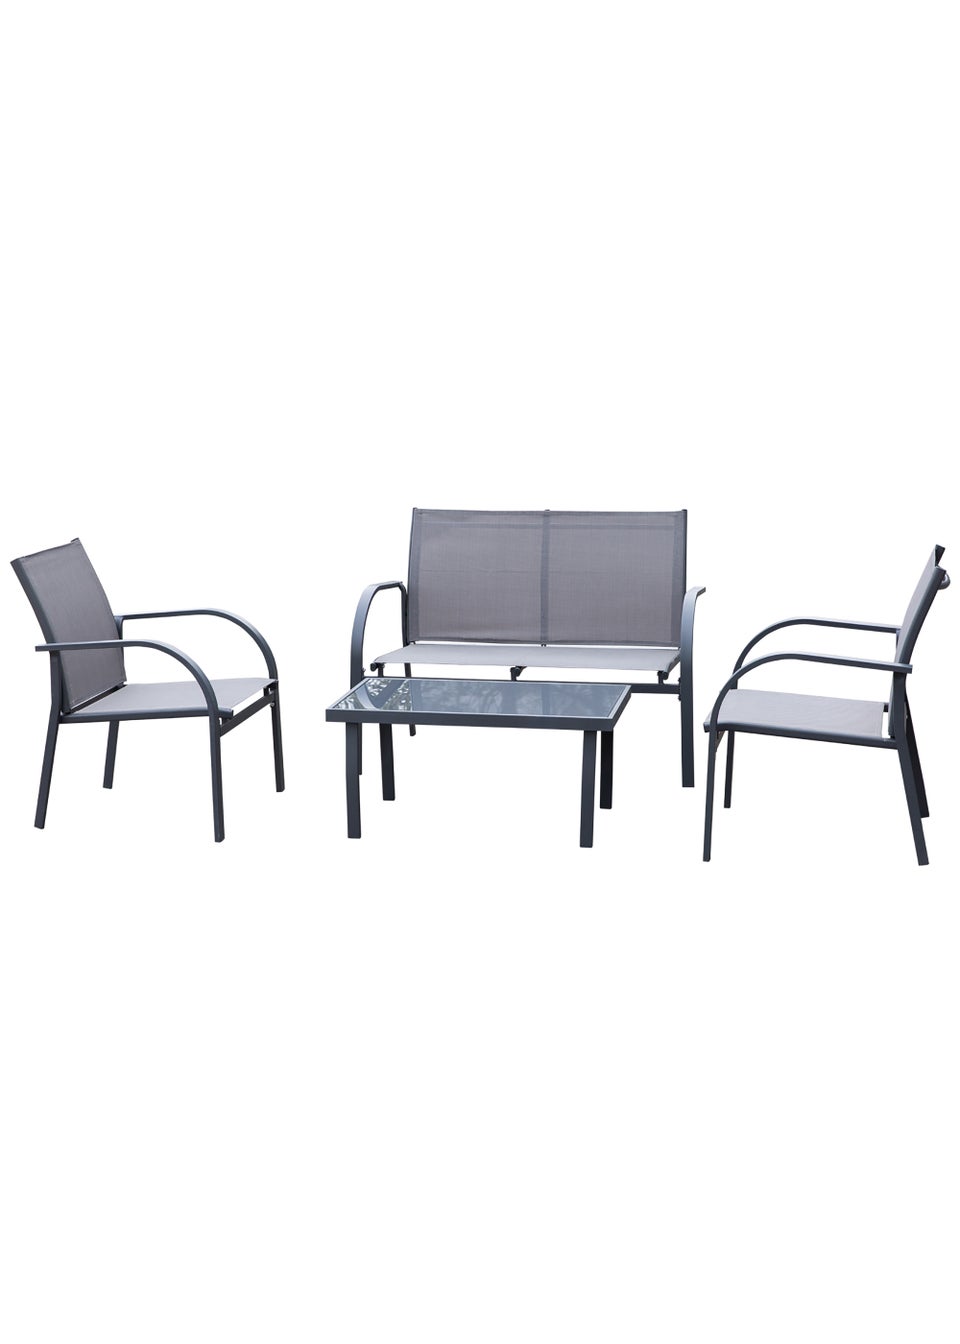 Outsunny 4 PCs Curved Steel Dining Furniture Set